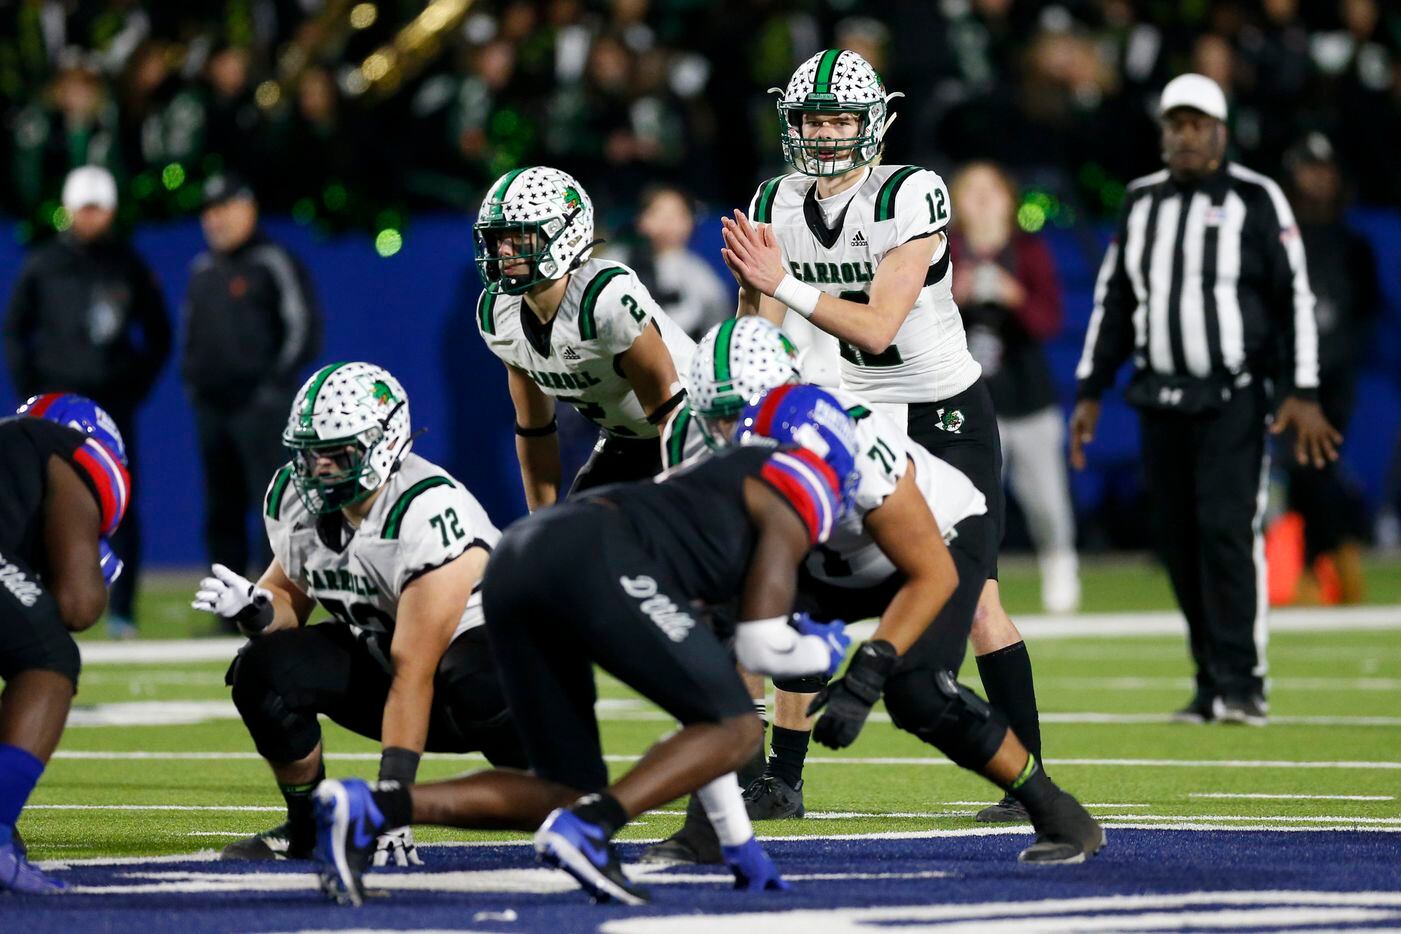 Southlake Carroll quarterback Kaden Anderson (12) readies to take the snap during the second half of their Class 6A Division I state semifinal playoff game against Duncanville at McKinney ISD Stadium in McKinney, Texas, Saturday, Dec. 11, 2021. Duncanville defeated Southlake Carroll 35-9. (Elias Valverde II/The Dallas Morning News)